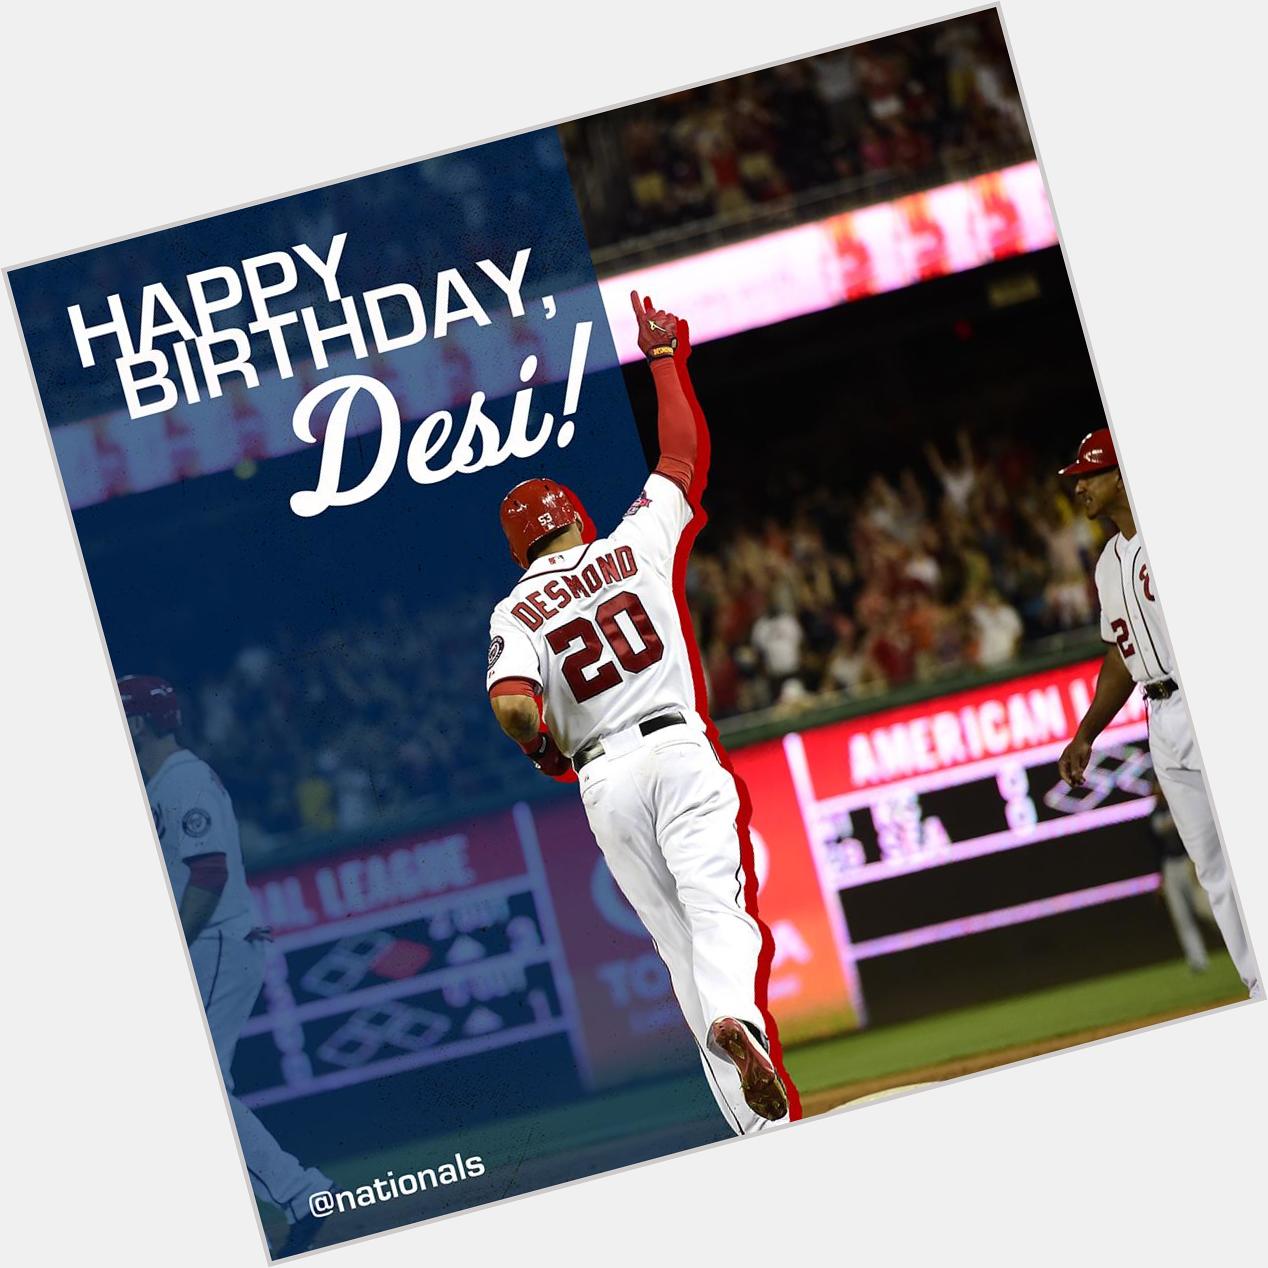 Wishing a very Happy Birthday to our very own, Ian Desmond! Here\s hoping for a day filled with 